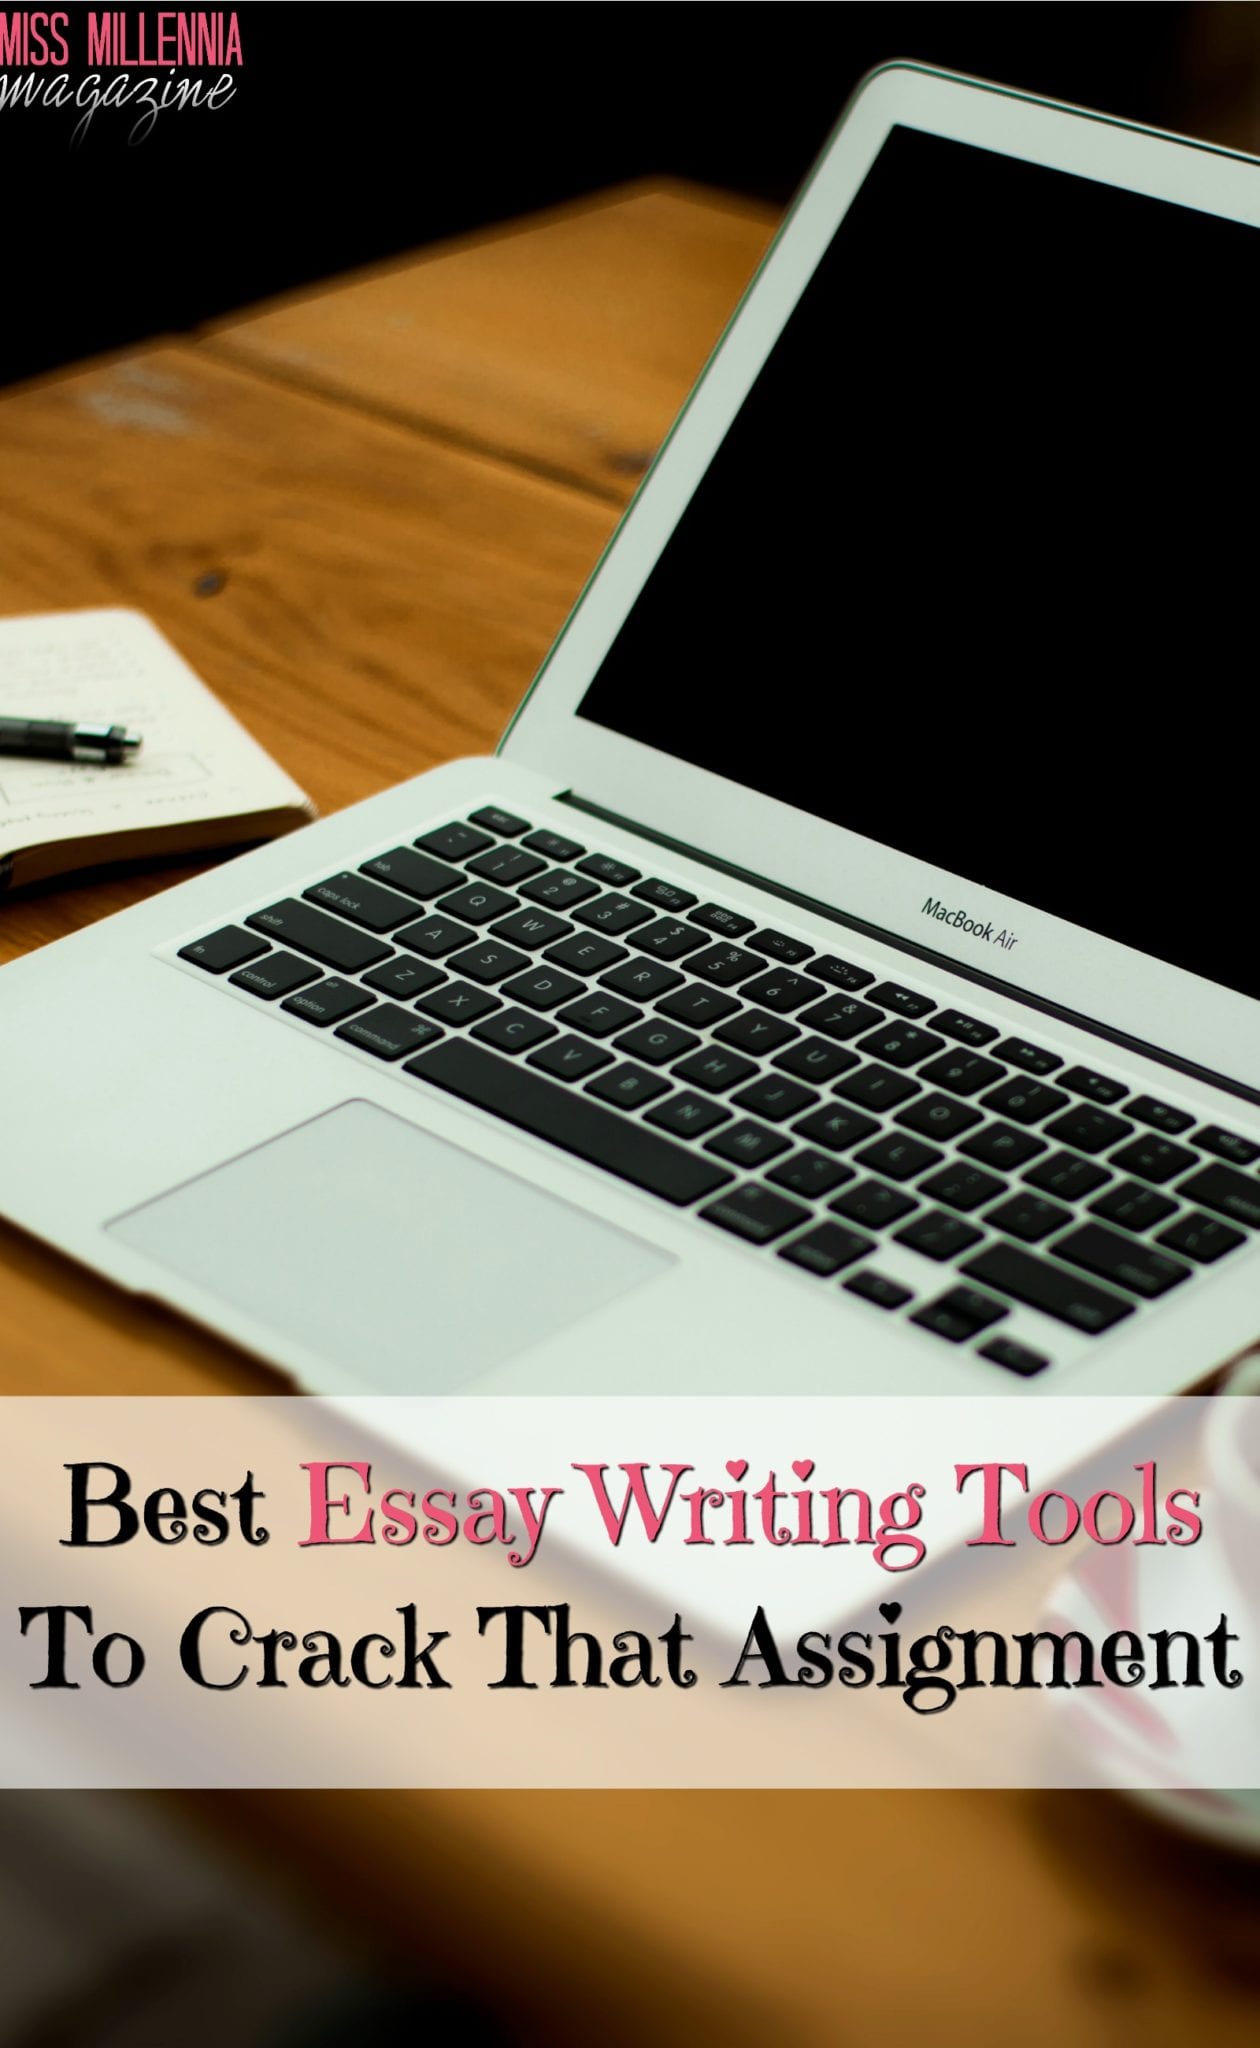 best-essay-writing-tools-to-crack-that-assignment